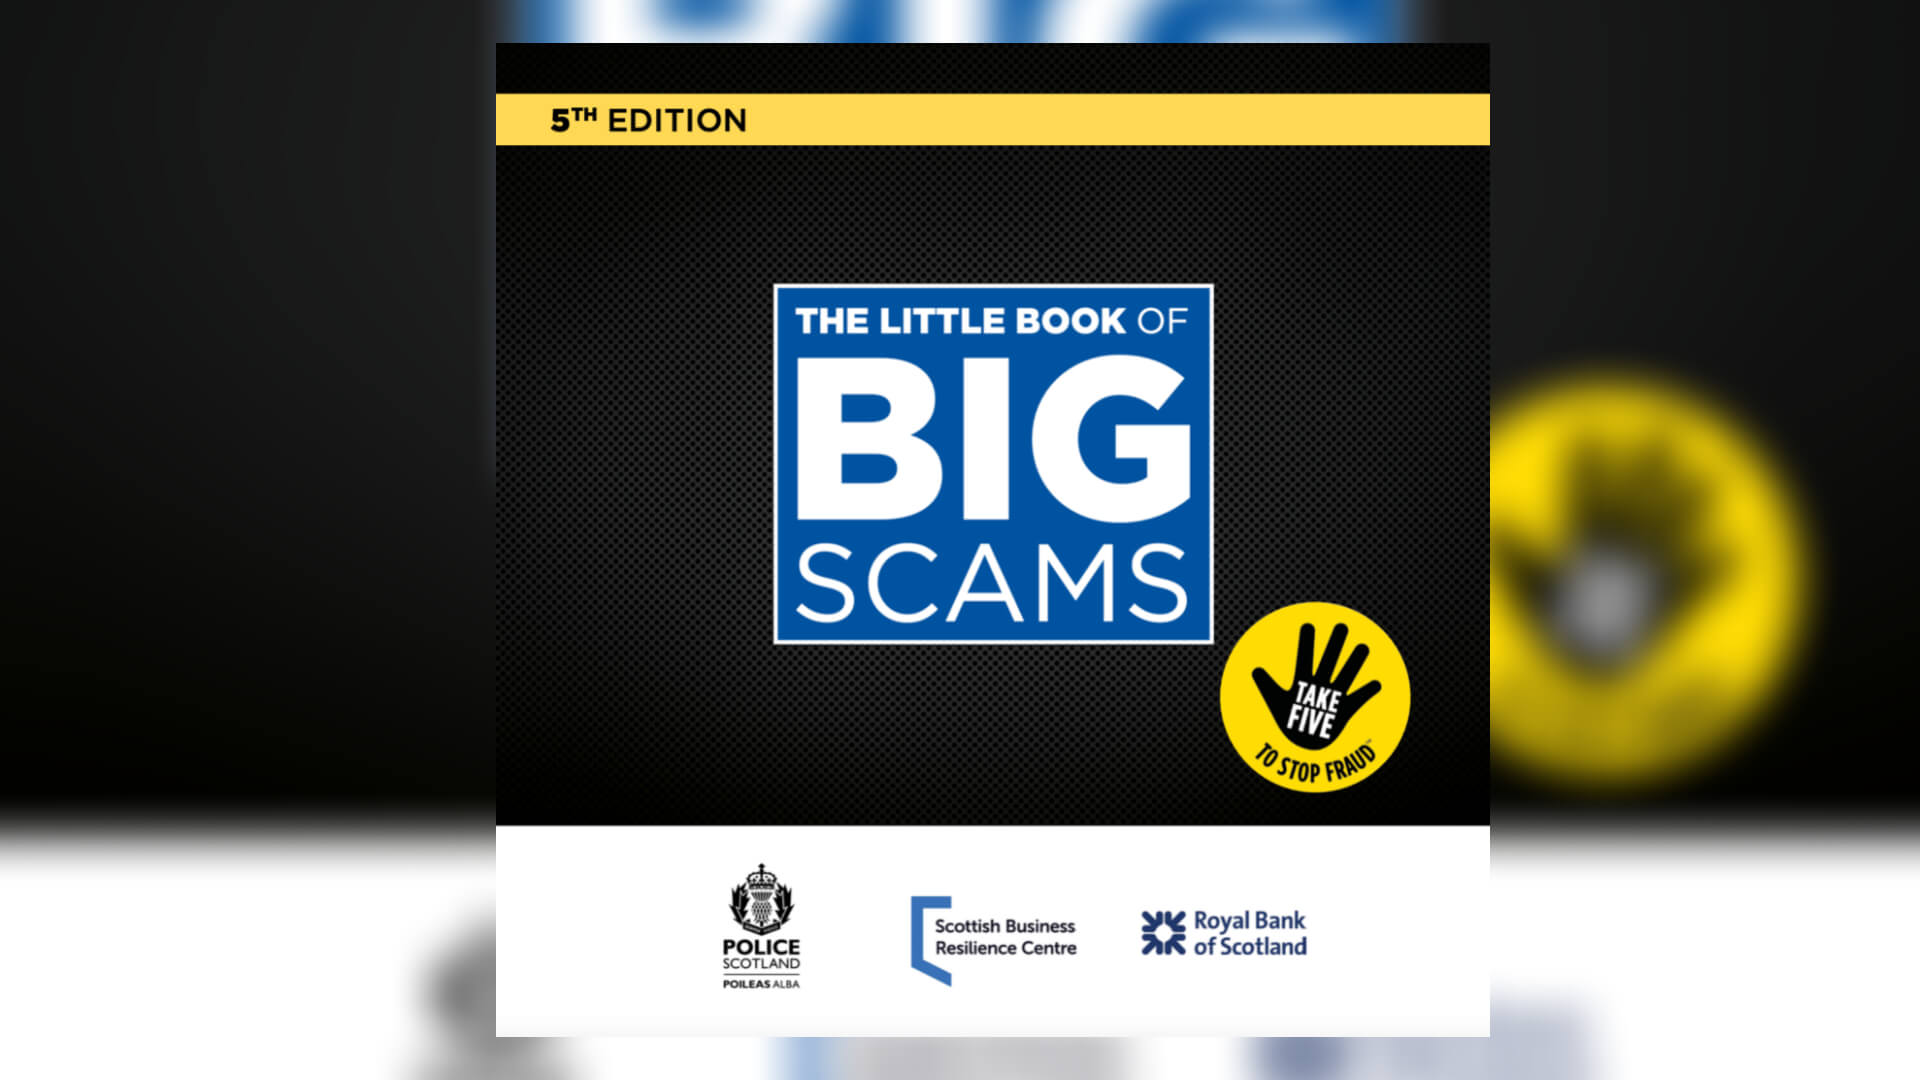 The Little Book Of Big Scams (5th Edition) Released: How To Protect Yourself From Fraudsters